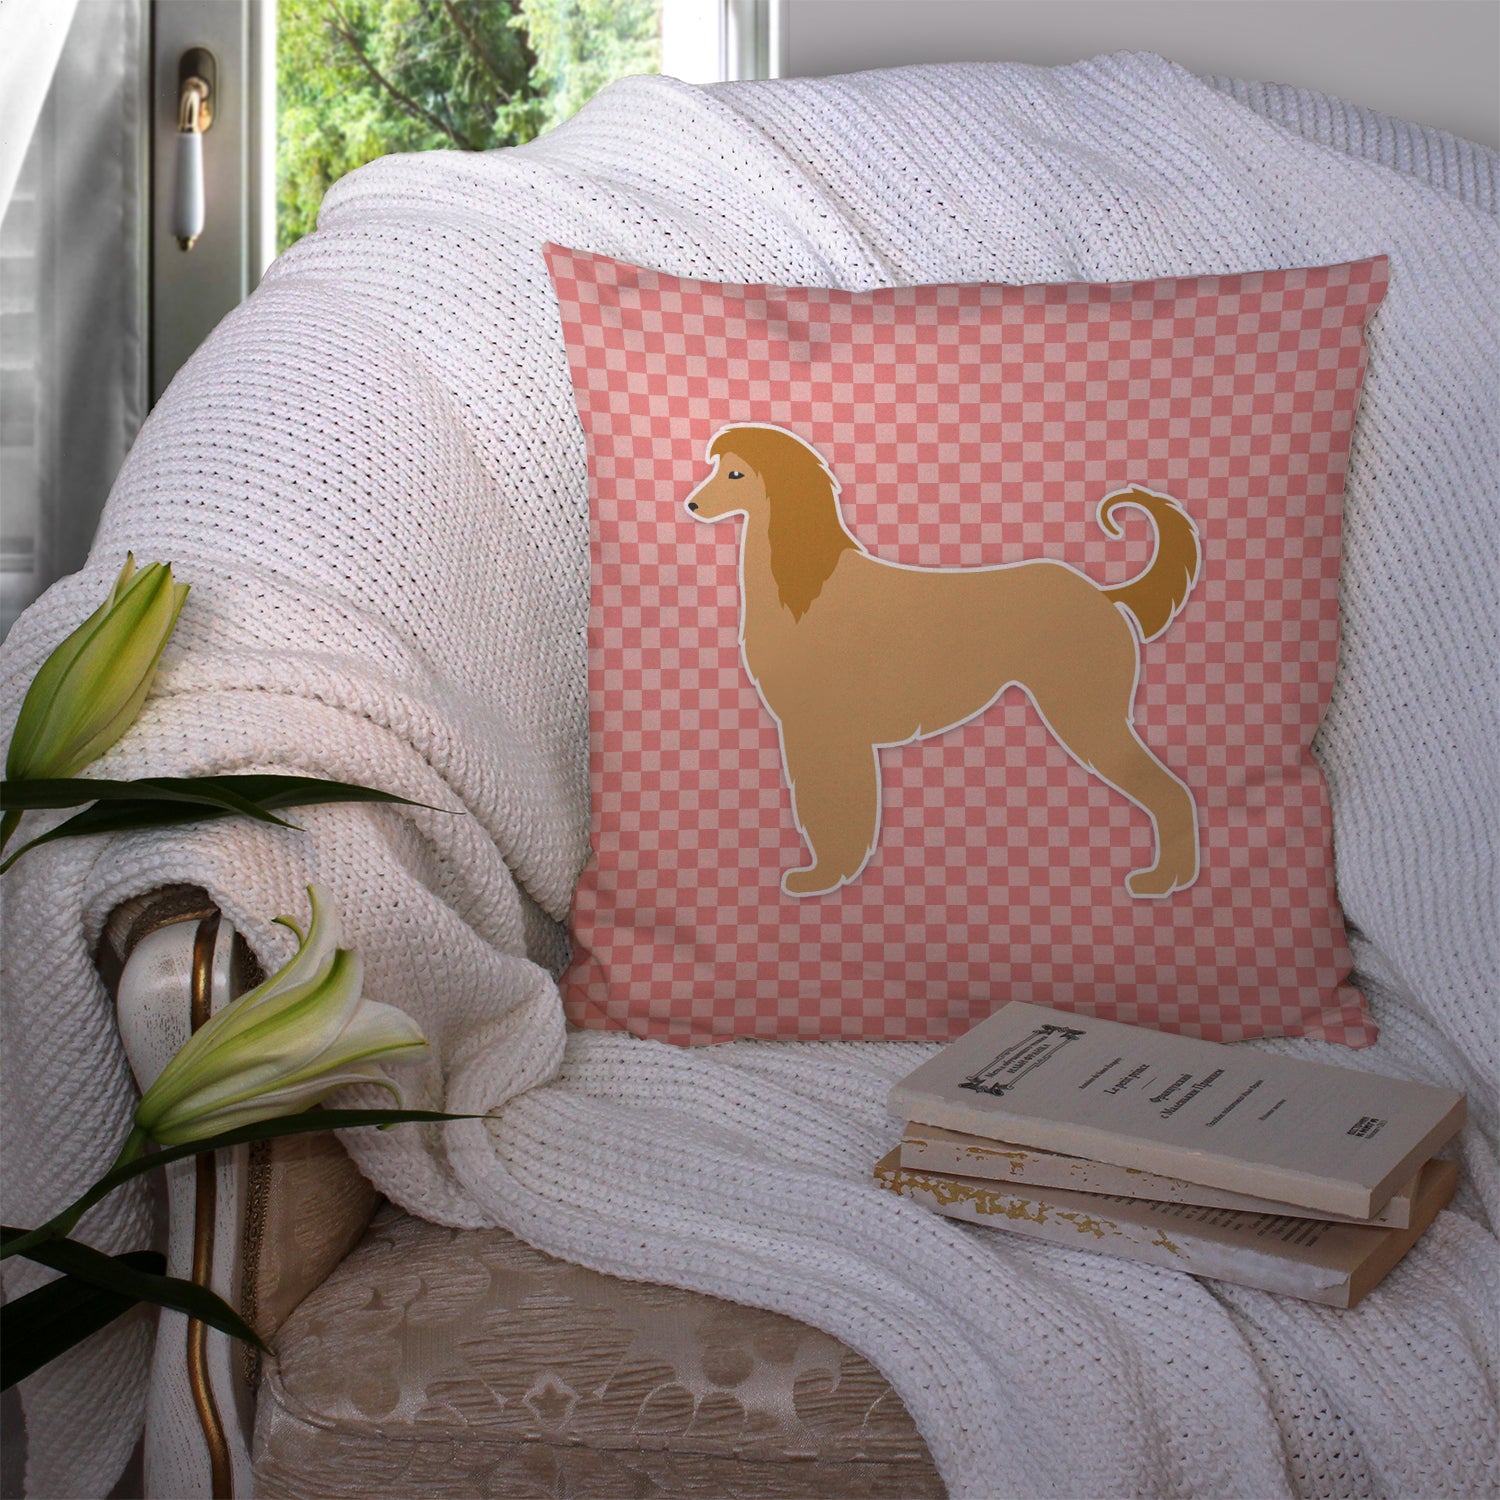 Afghan Hound Checkerboard Pink Fabric Decorative Pillow BB3606PW1414 - the-store.com